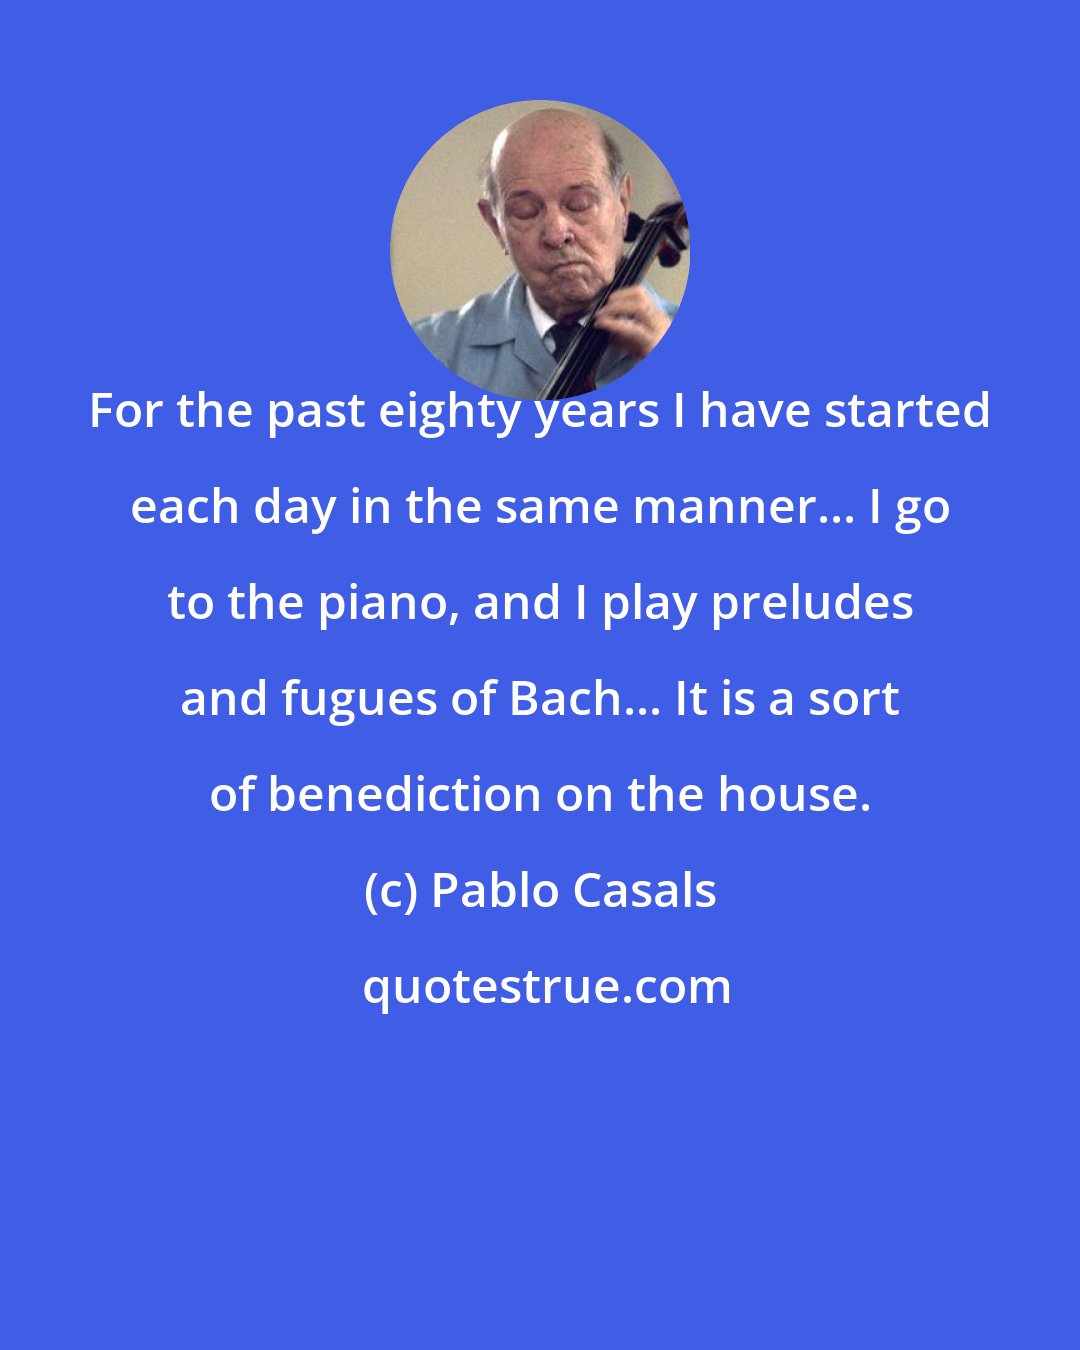 Pablo Casals: For the past eighty years I have started each day in the same manner... I go to the piano, and I play preludes and fugues of Bach... It is a sort of benediction on the house.